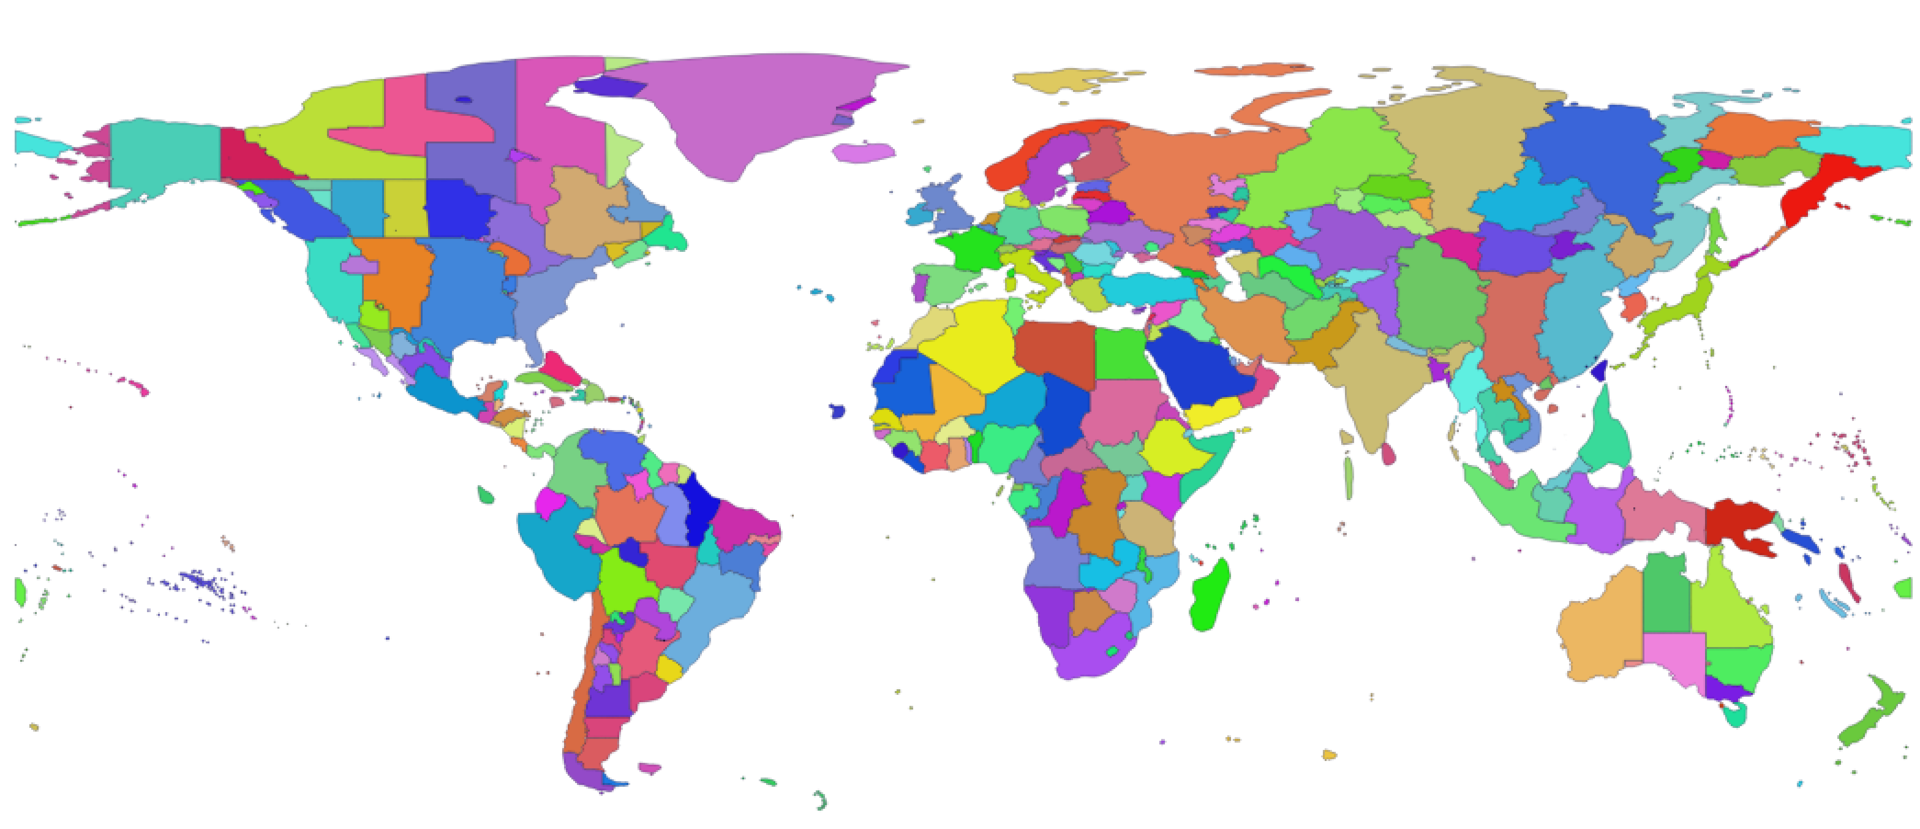 An overview of the different timezones, including historical ones, from Wikipedia